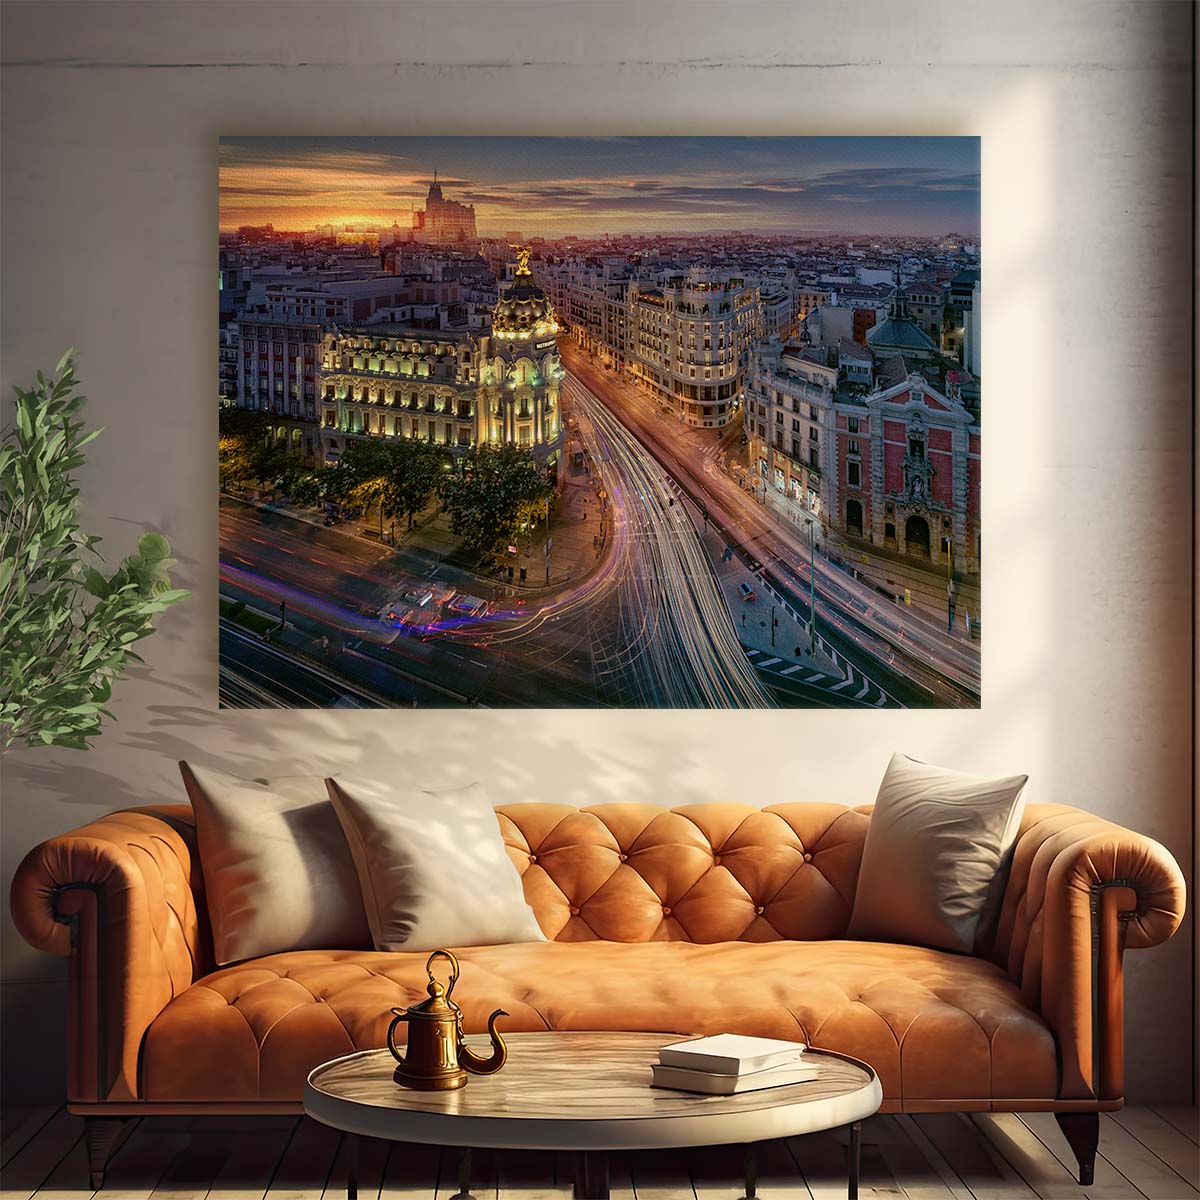 Madrid Skyline Sunset Iconic Cityscape Wall Art by Luxuriance Designs. Made in USA.